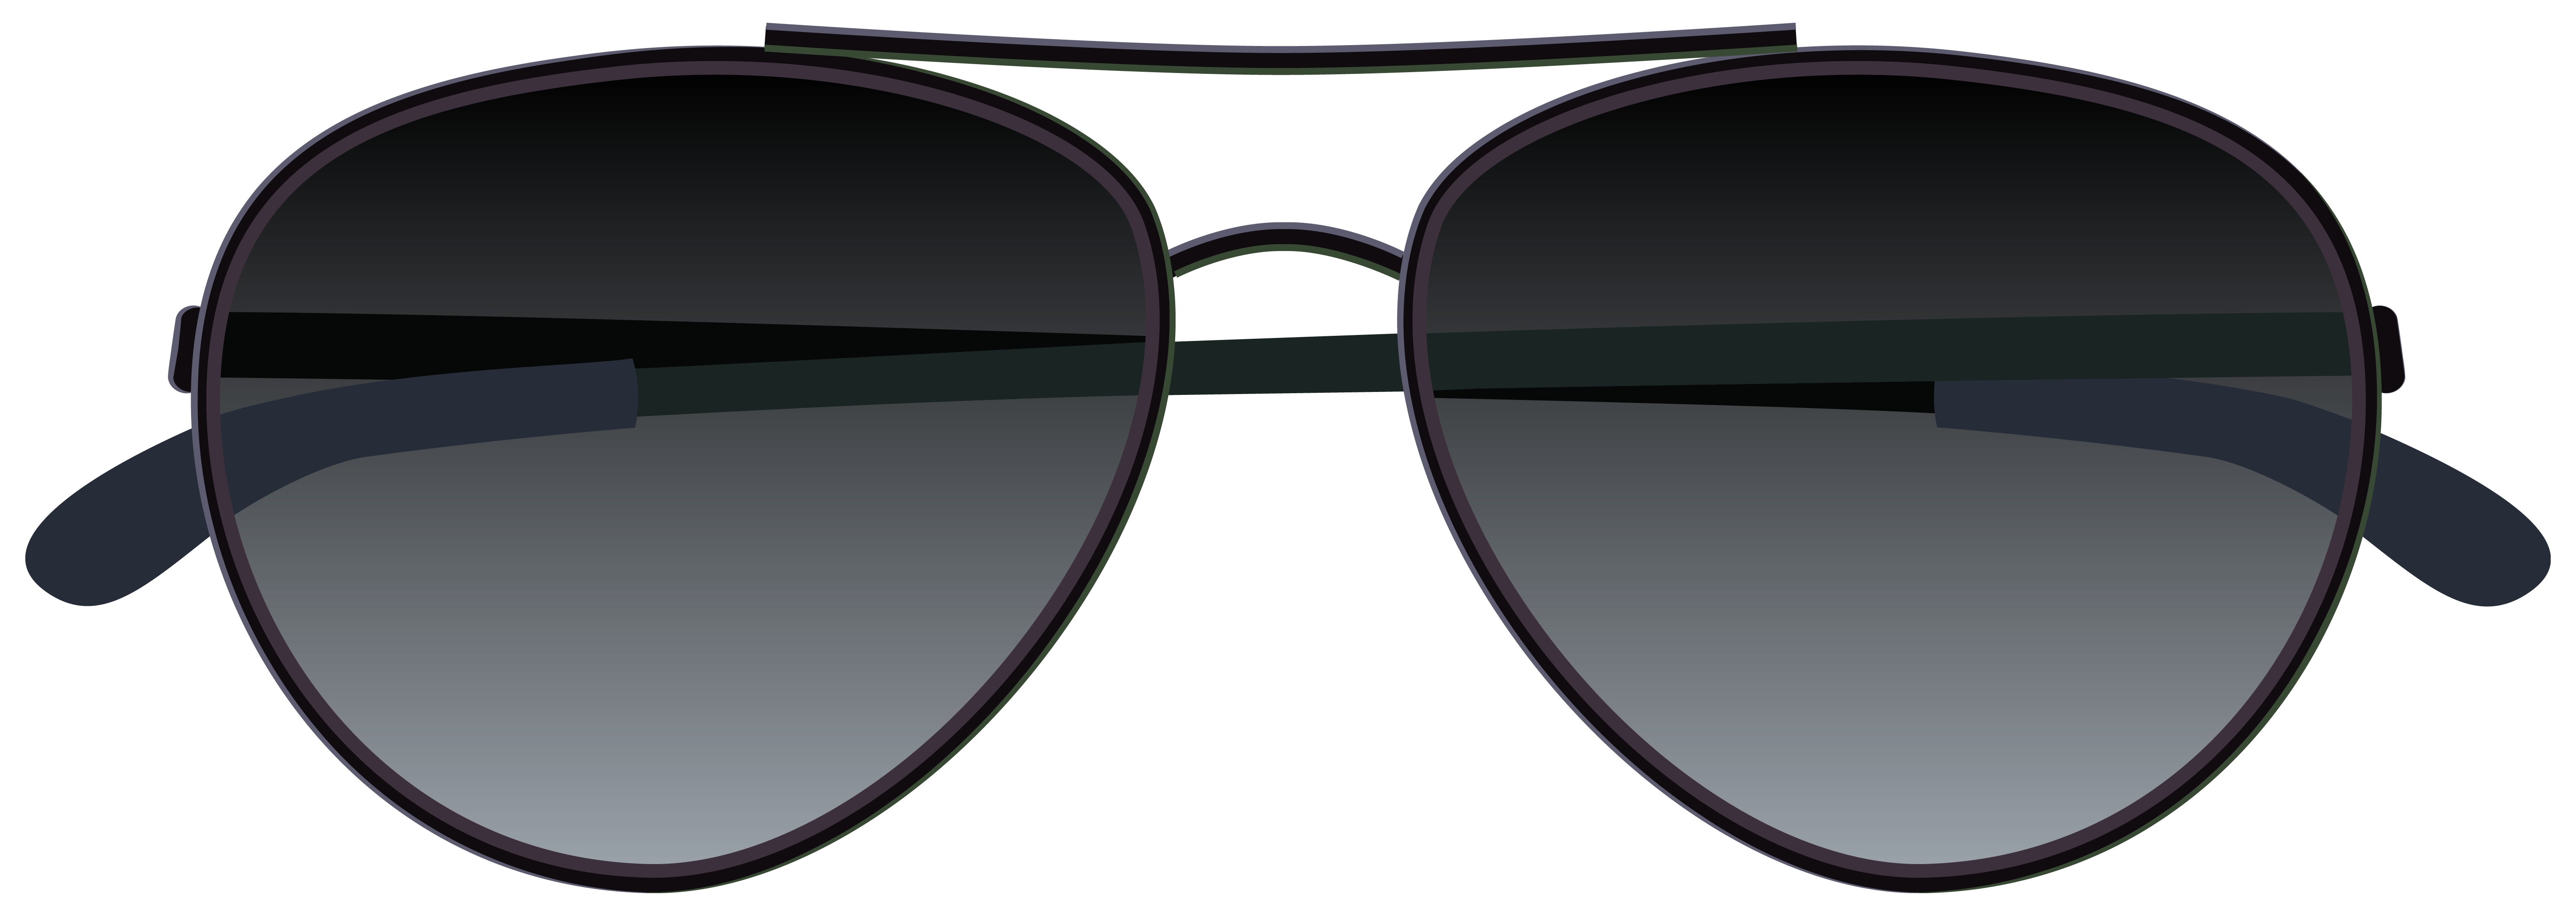 Picture Sunglasses Download Free Image Clipart